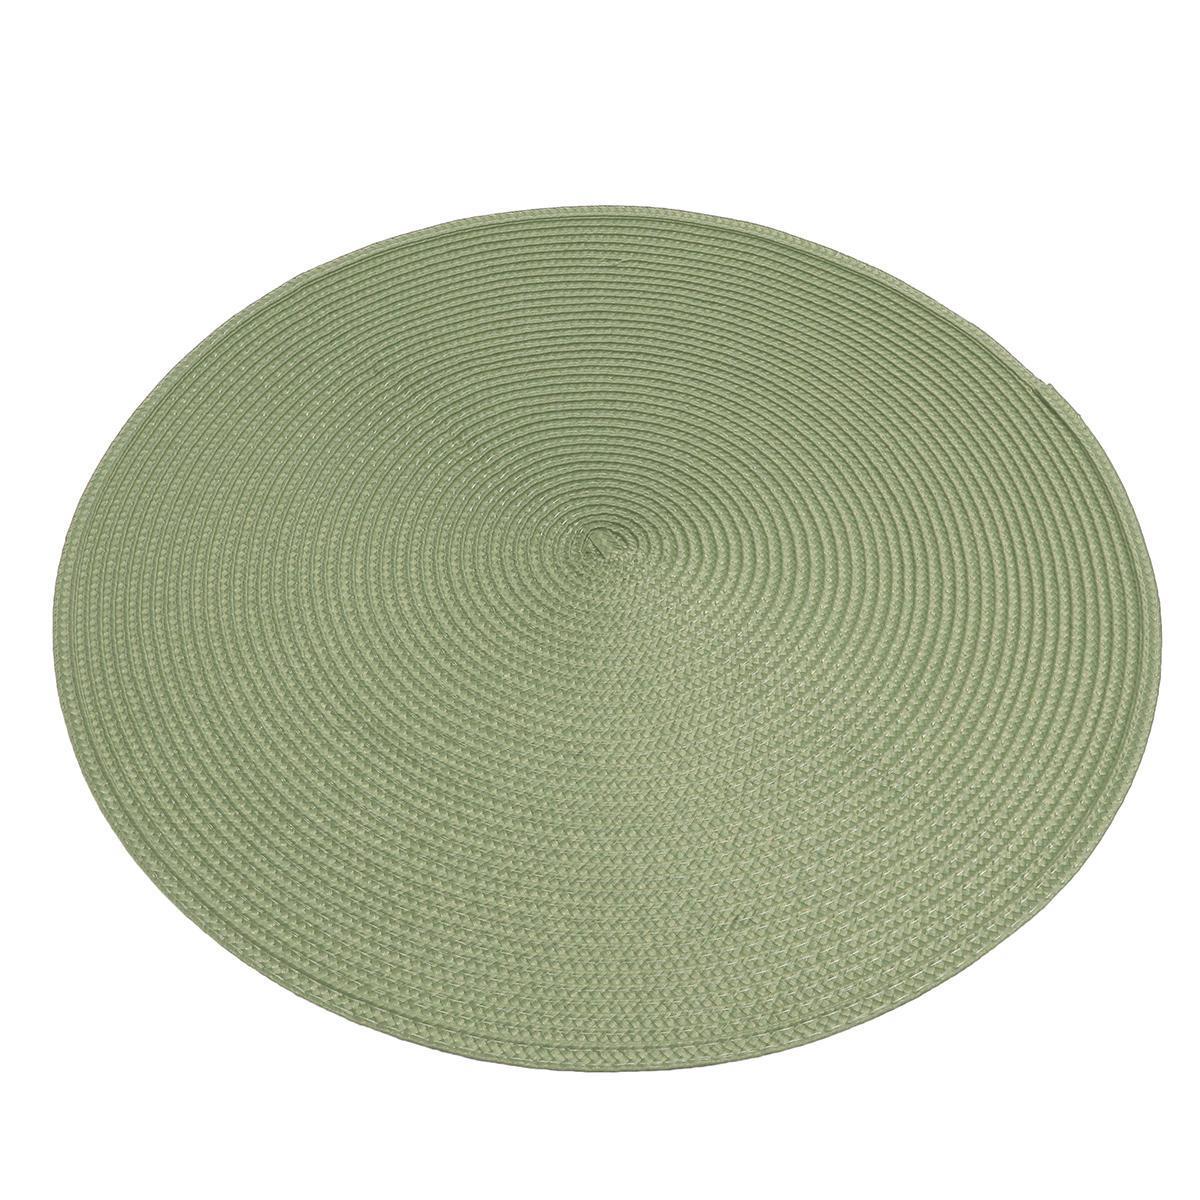 Round Jacquard Woven Non Slip Placemats Kitchen Dining Table Mat Heat Resistant